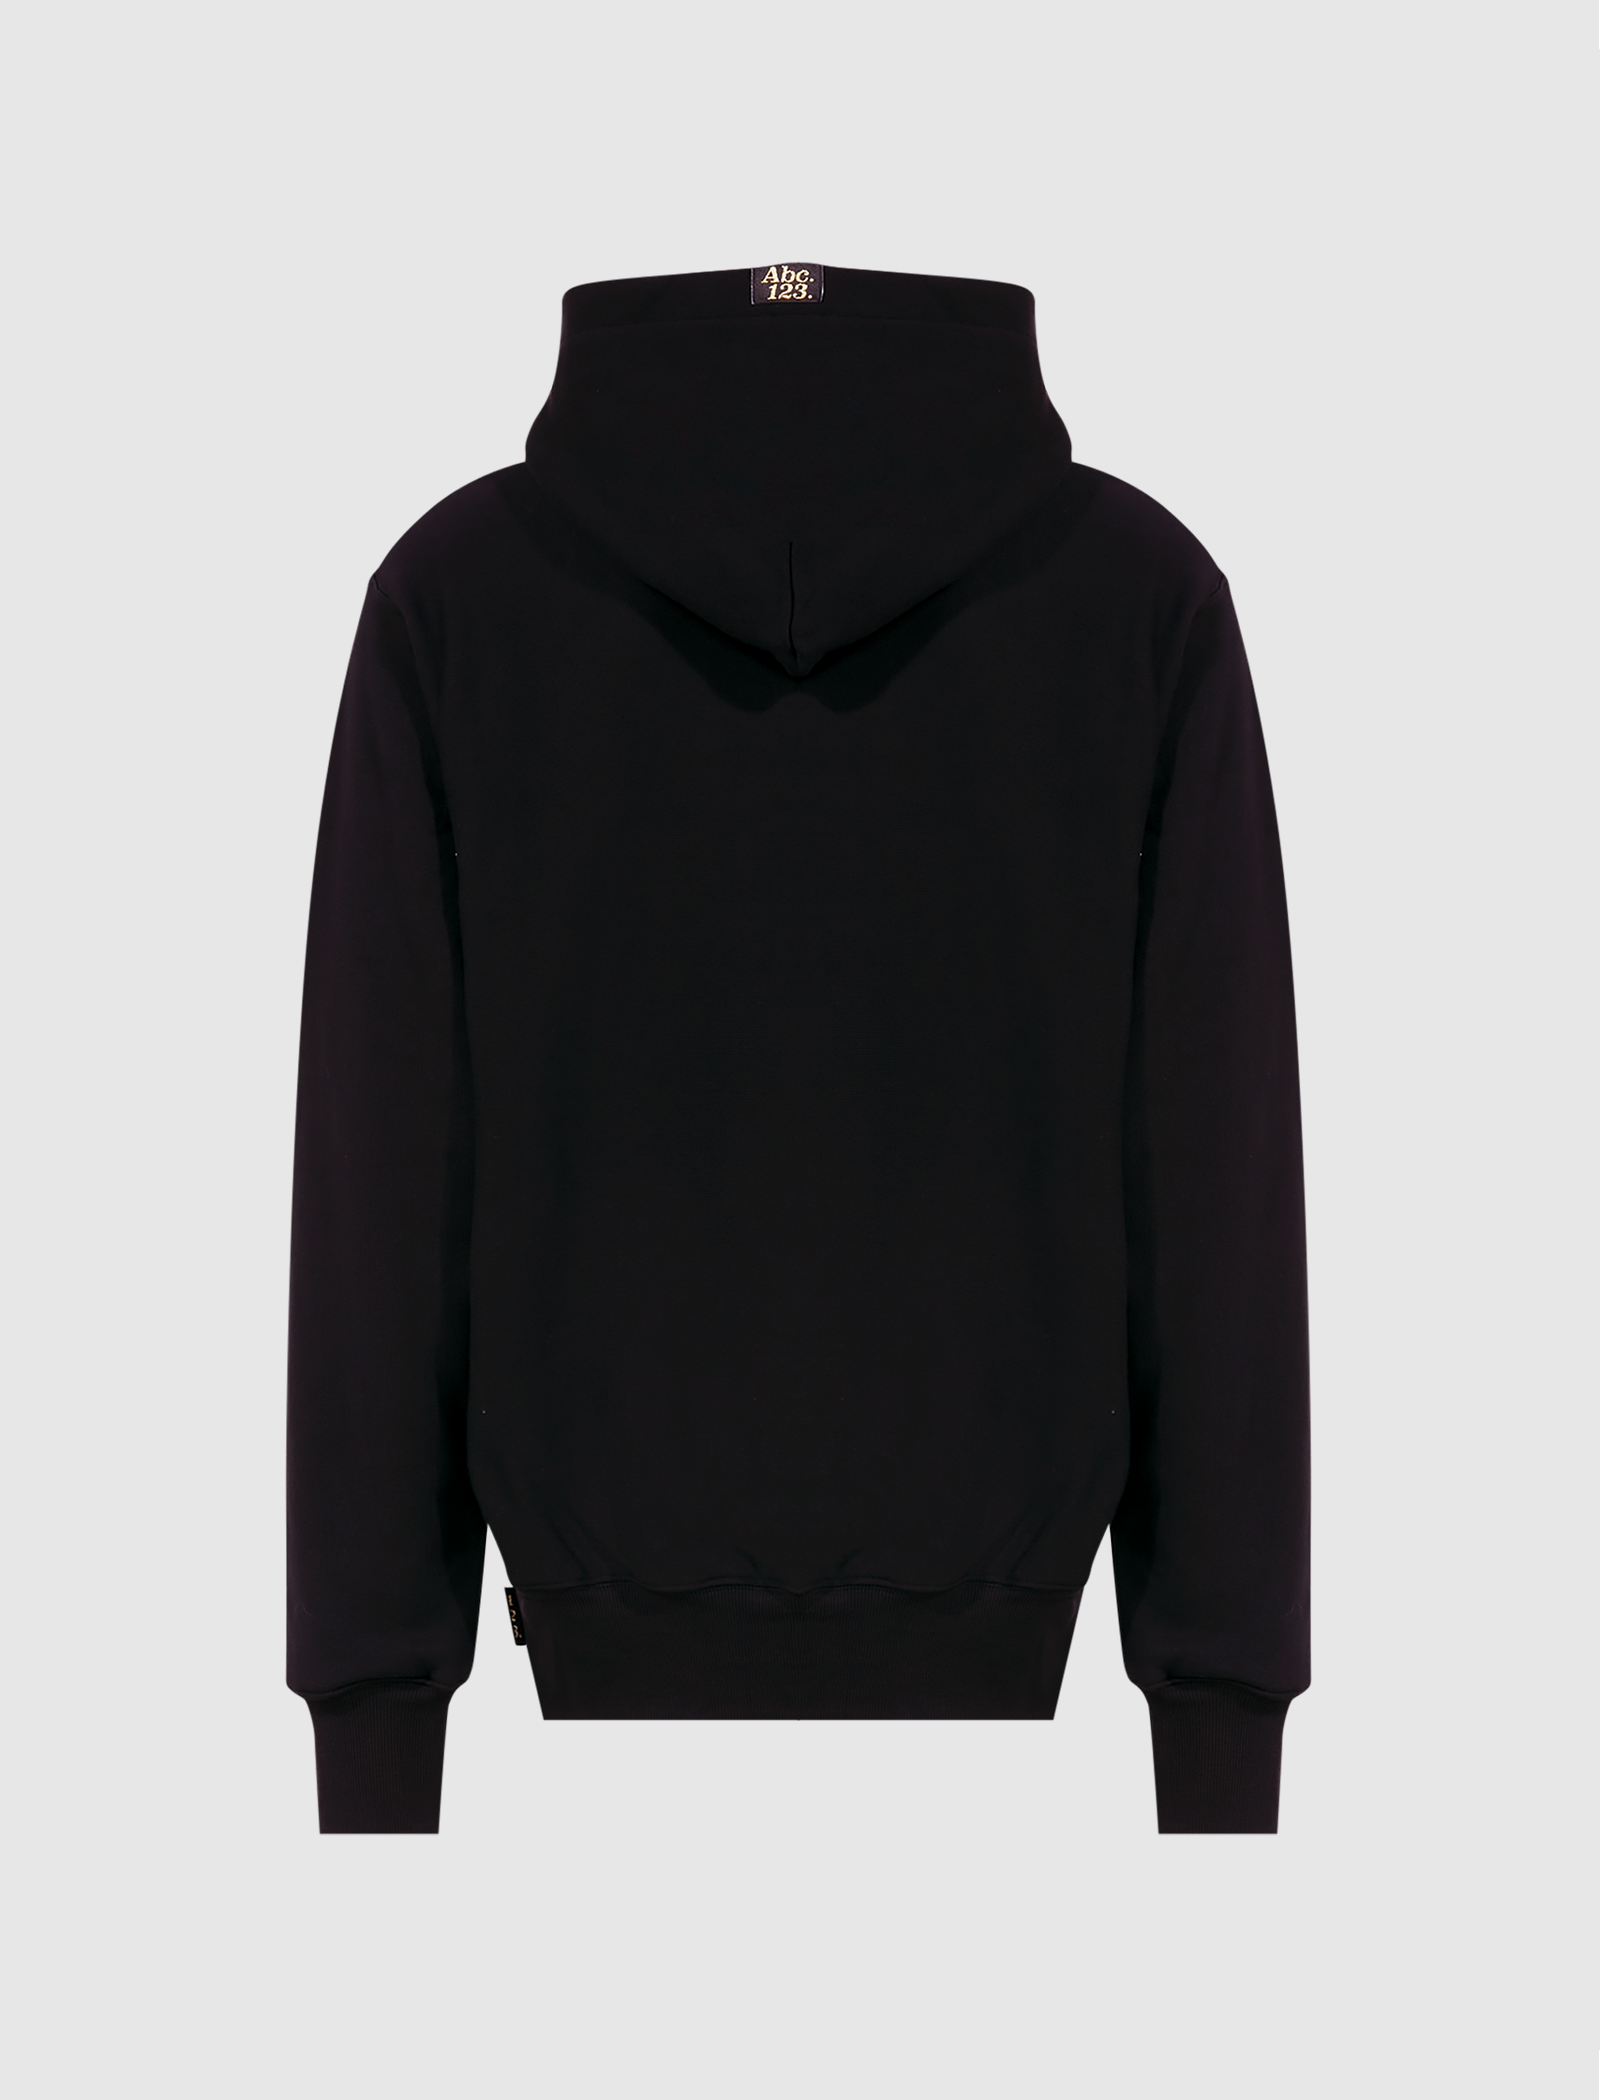 ADVISORY BOARD CRYSTALS PULLOVER HOODIE